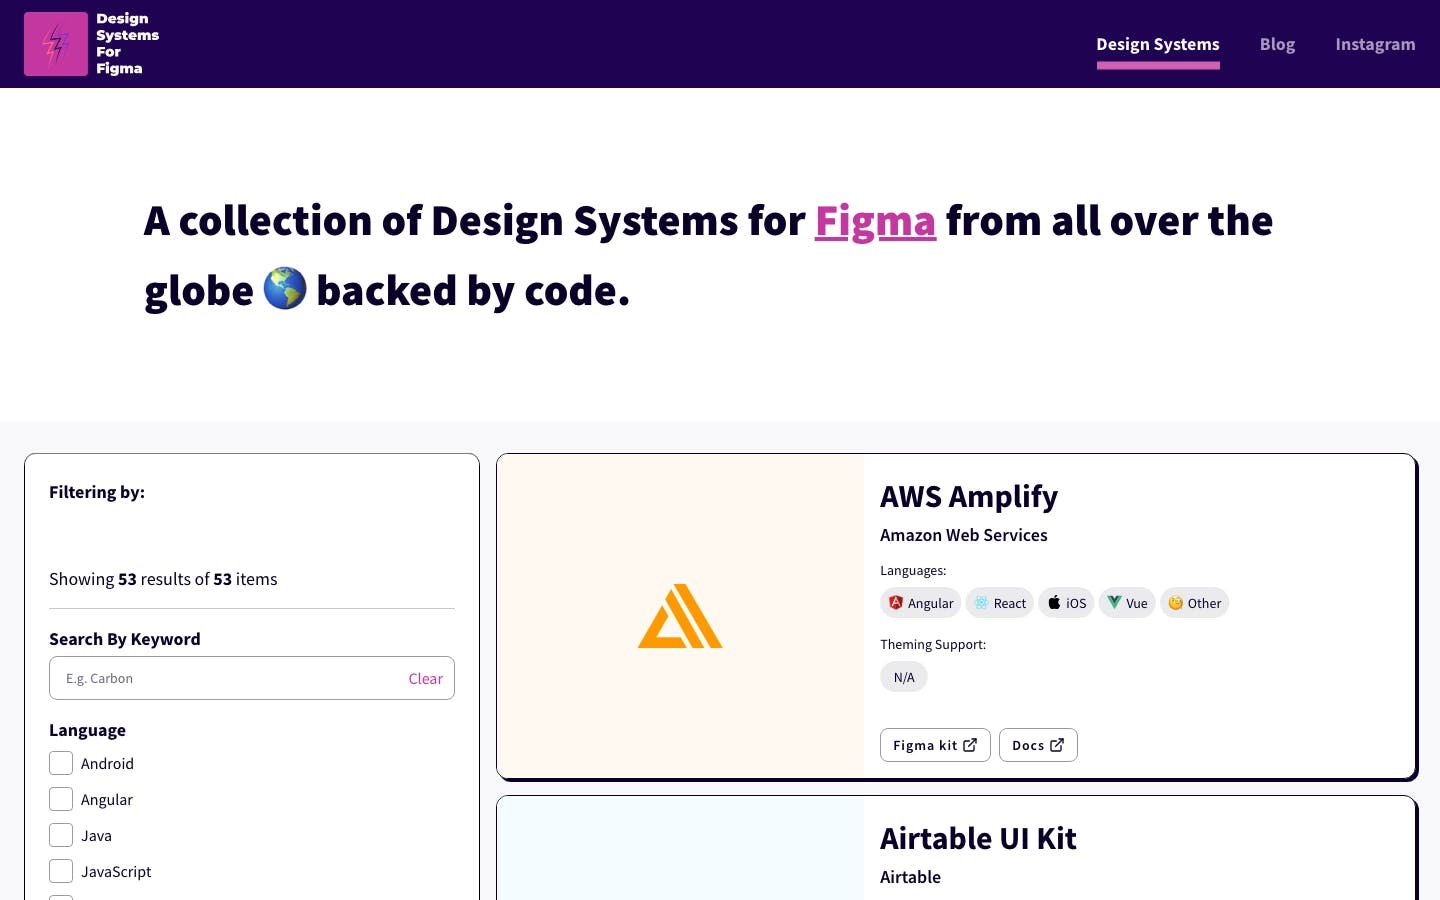 Design Systems for Figma